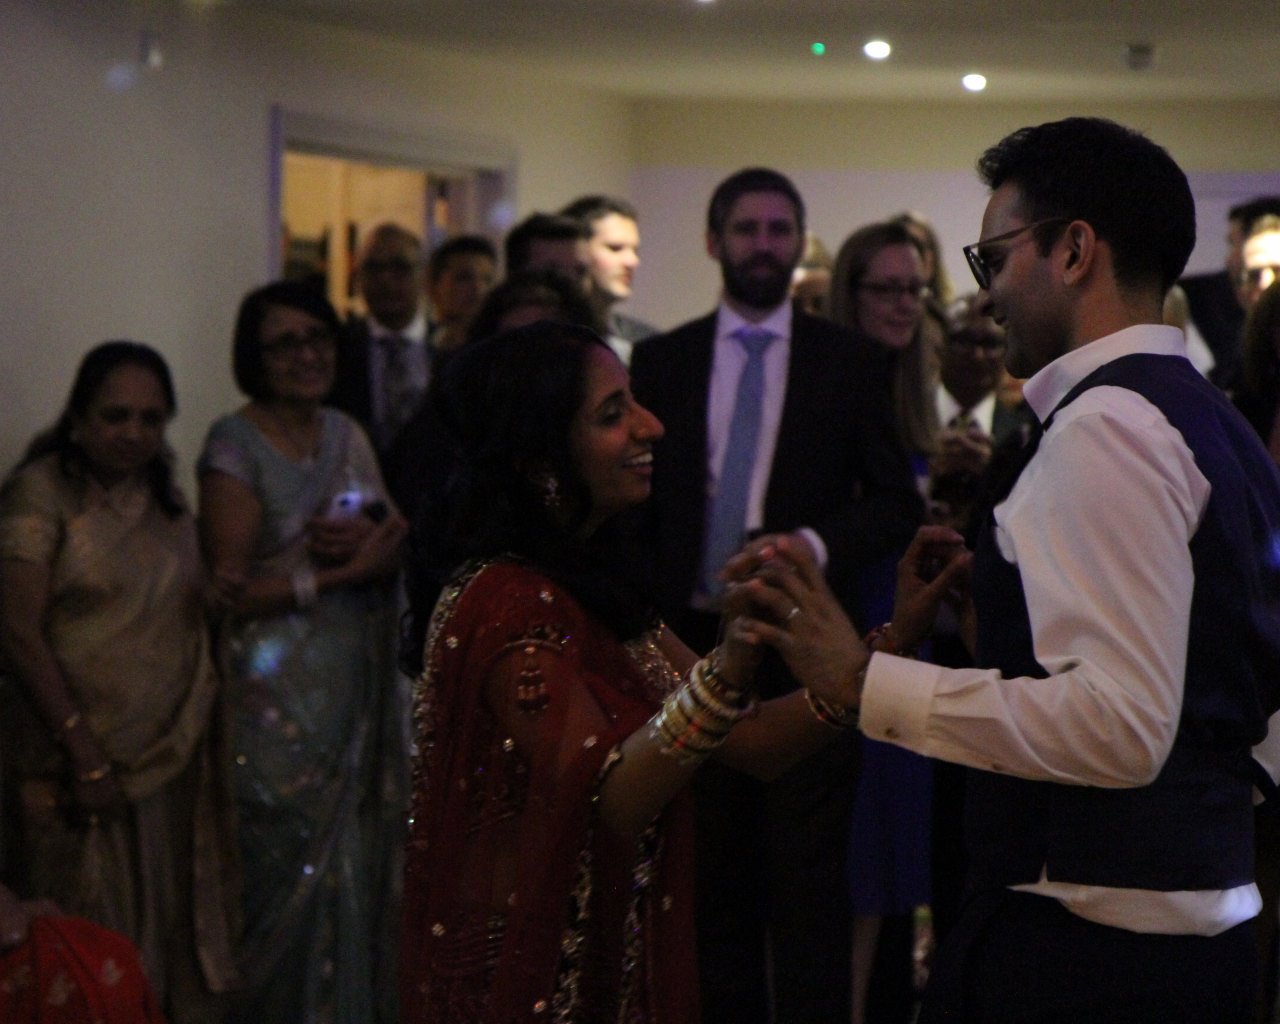 Wedding DJ plays first dance for a very happy couple at Millbridge Court luxury wedding venue in Surrey